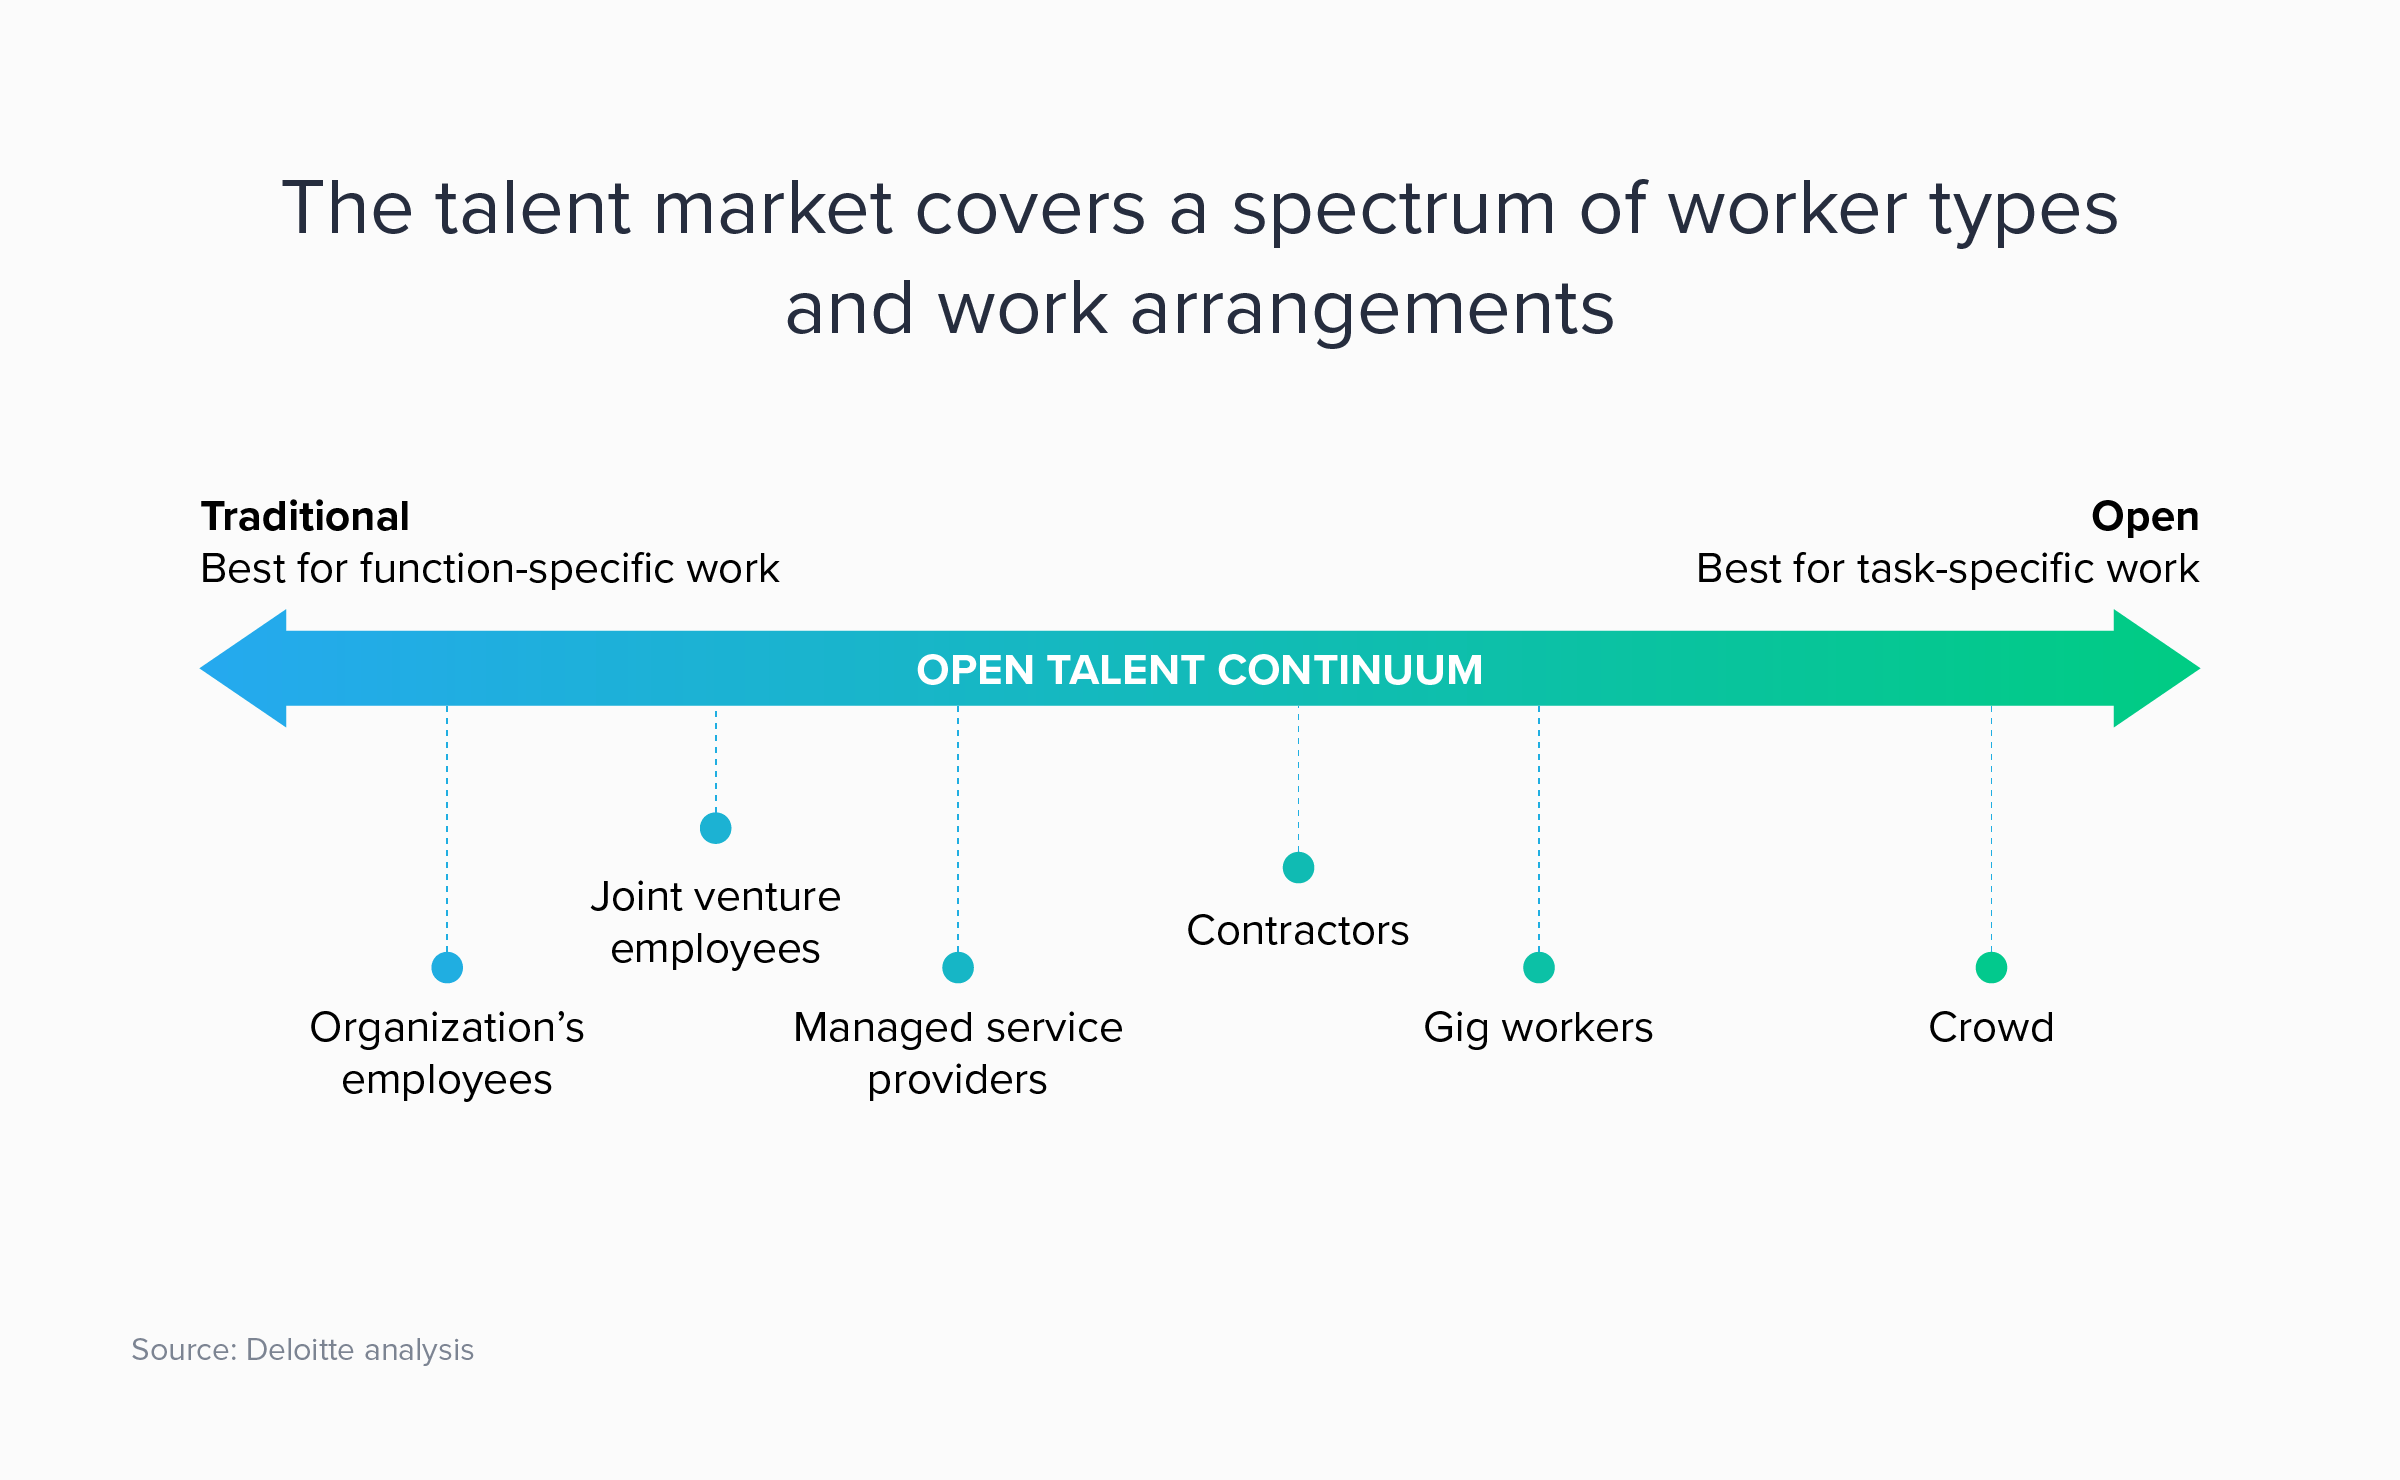 The talent market covers a spectrum of worker types and worker arrangements, from traditional (best for function-specific work) to open (best for task-specific work).